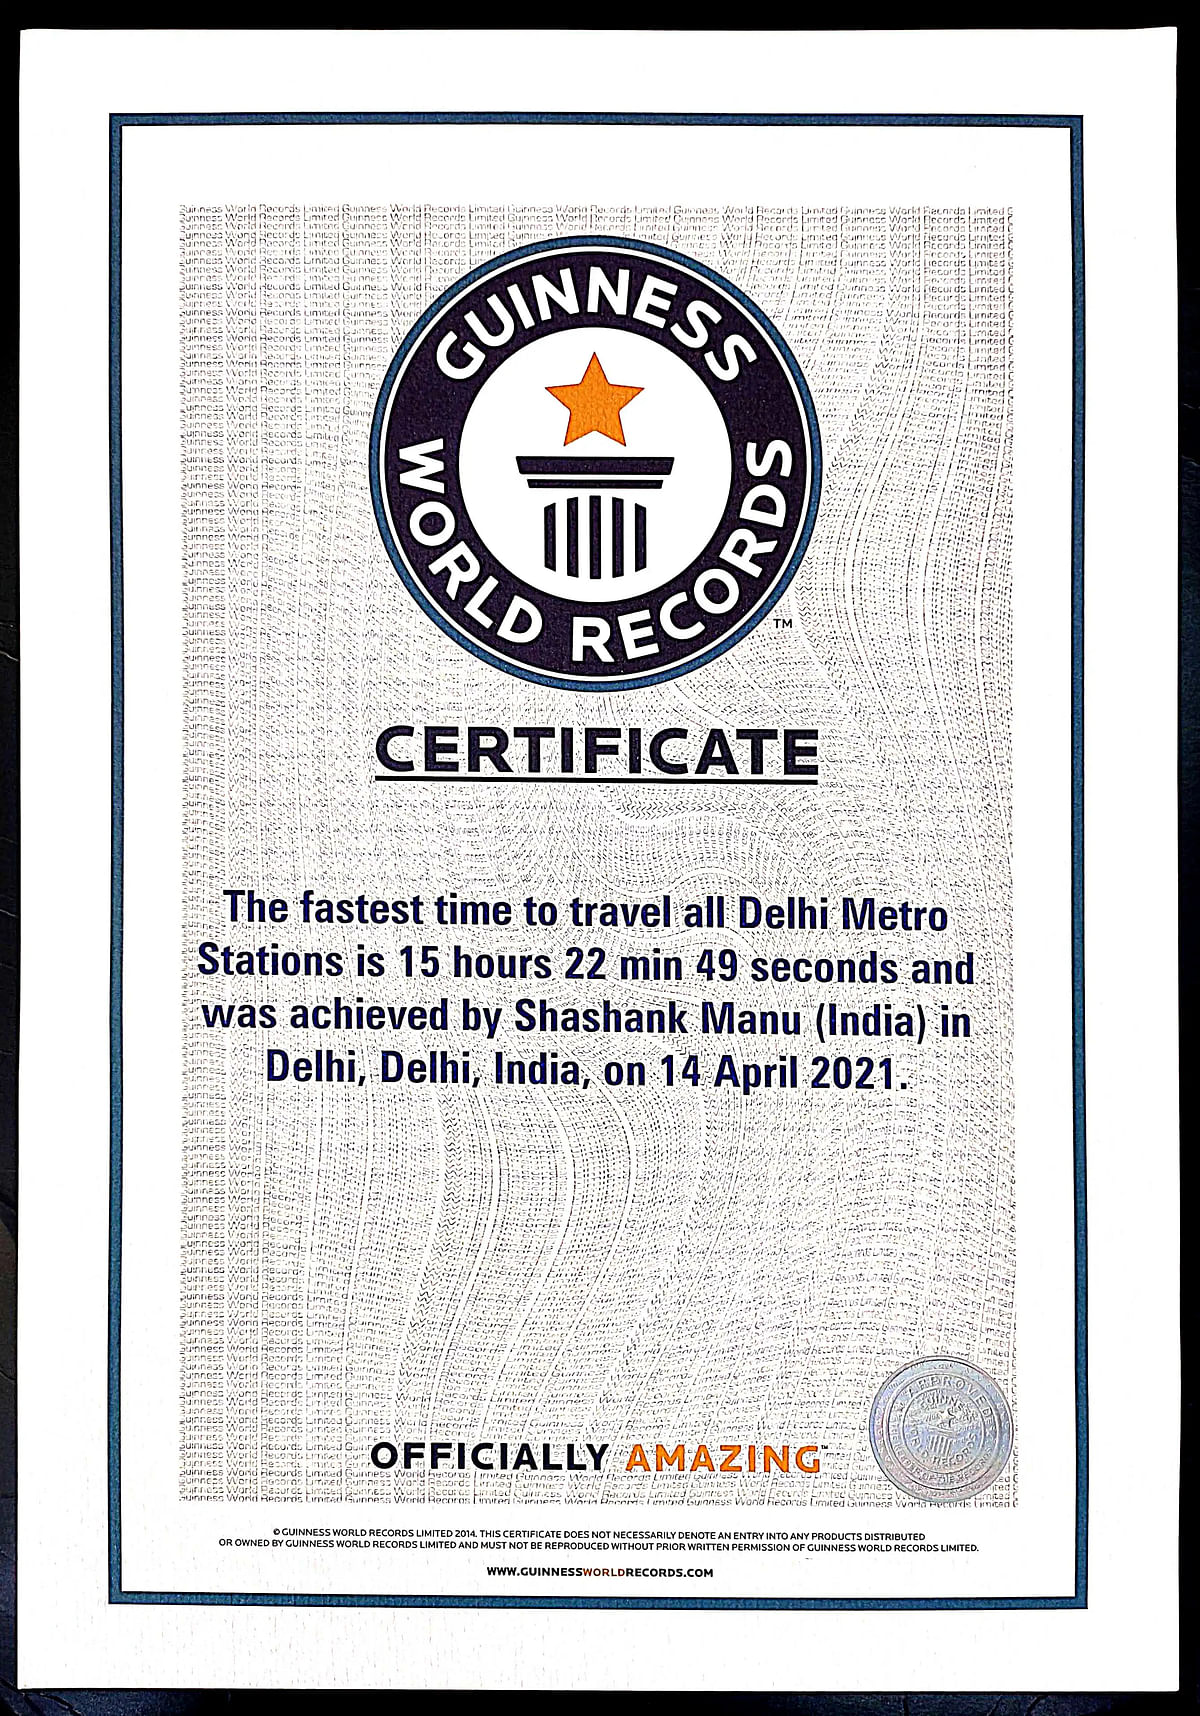 The record was set by Shashank Manu, a freelance researcher, in 2021. 